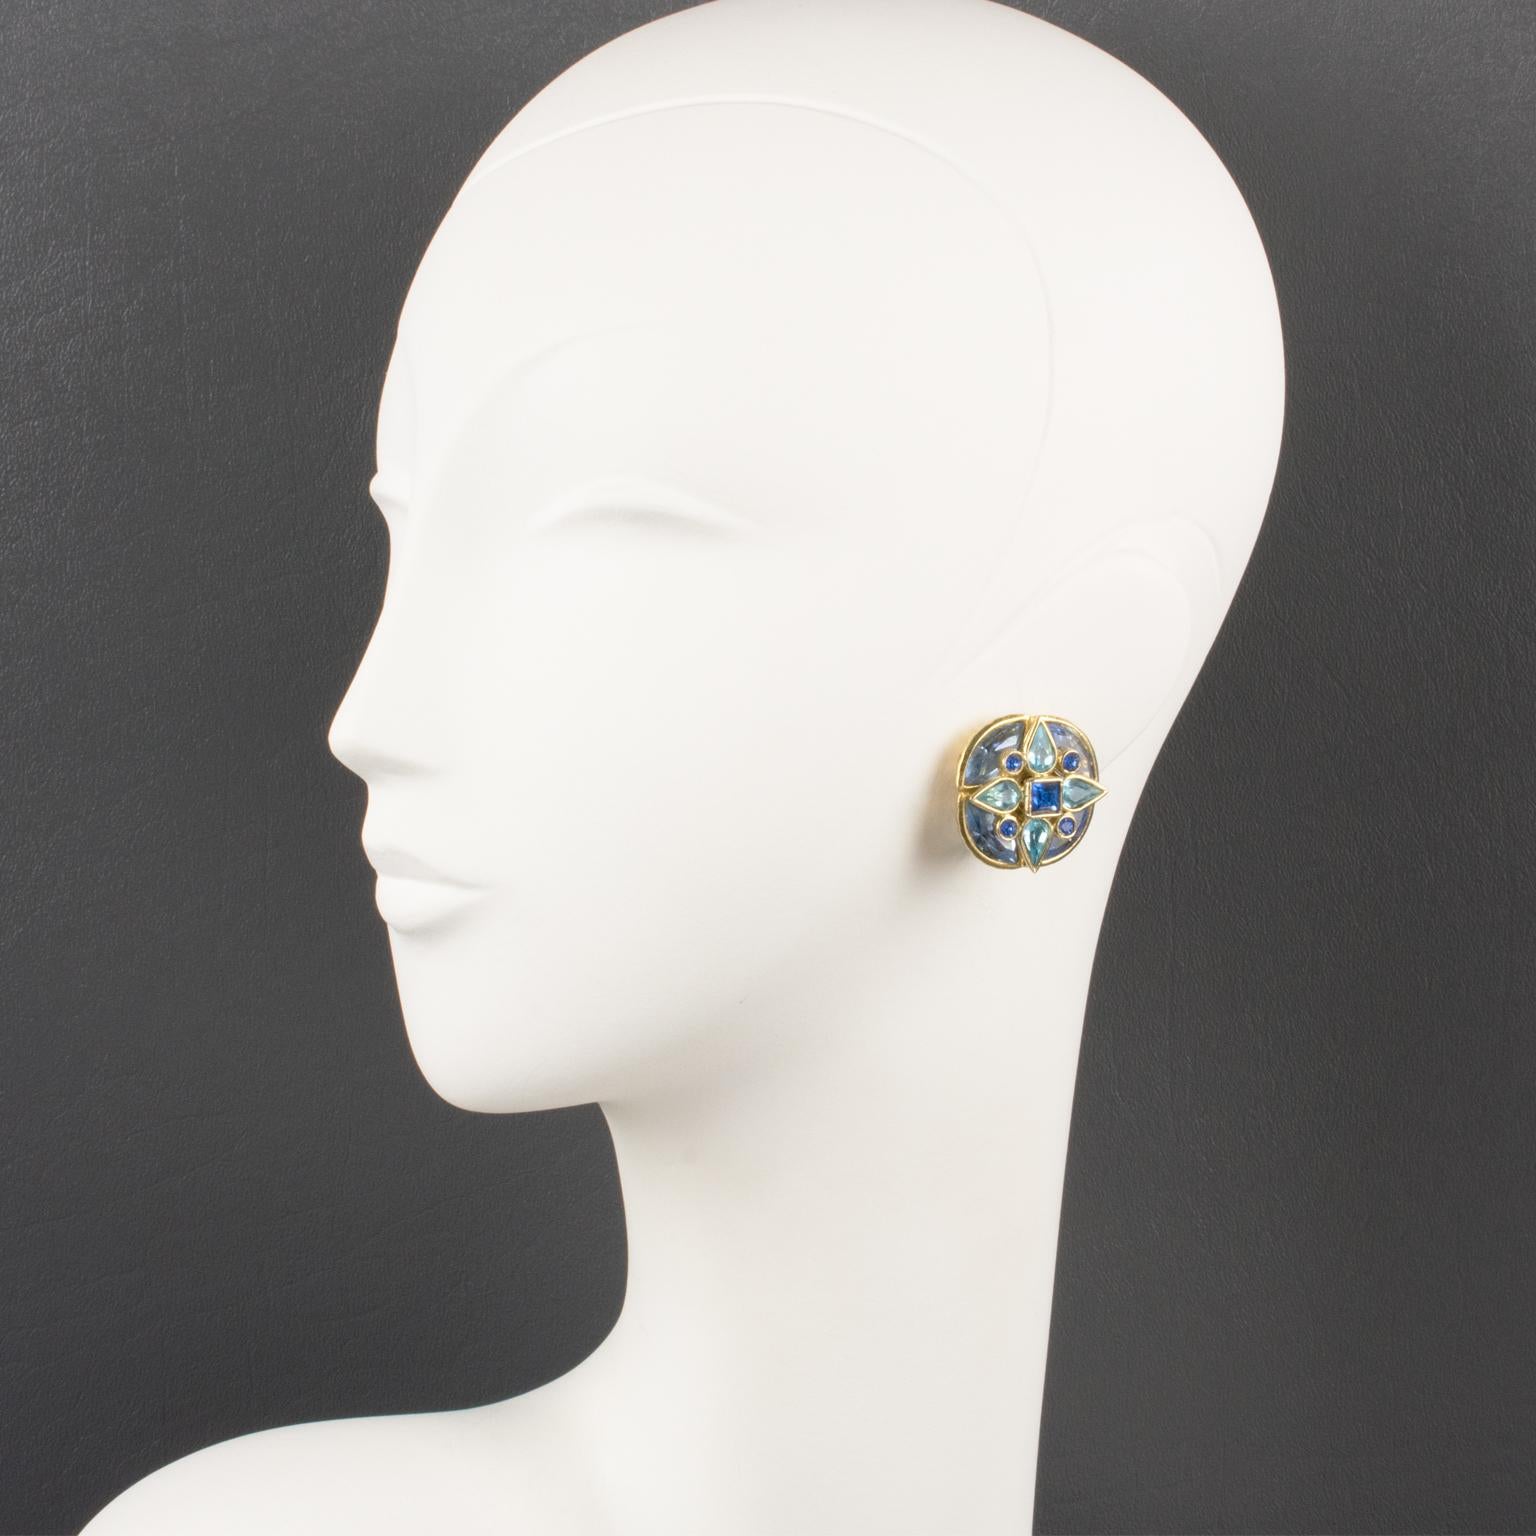 Gorgeous Yves Saint Laurent Paris floral clip-on earrings. Gilt metal flower framing topped with crystal rhinestones in assorted shape and colors. Blue range tones in baby blue, bright blue, and lavender blue. Engraved marking on fastenings: 